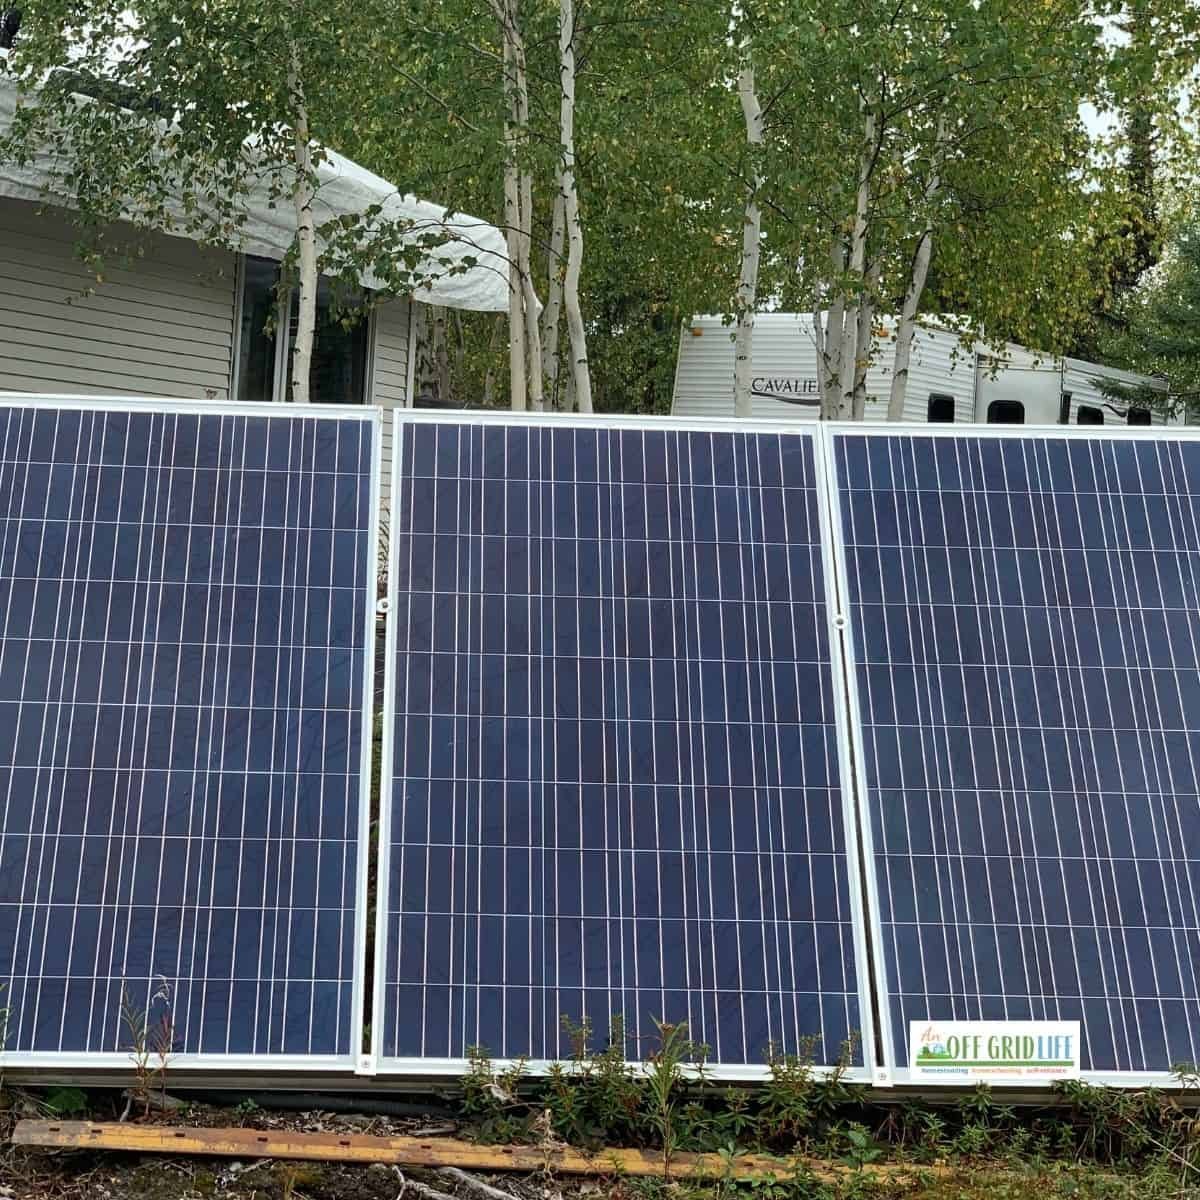 Off Grid Electricity: What You Need to Know